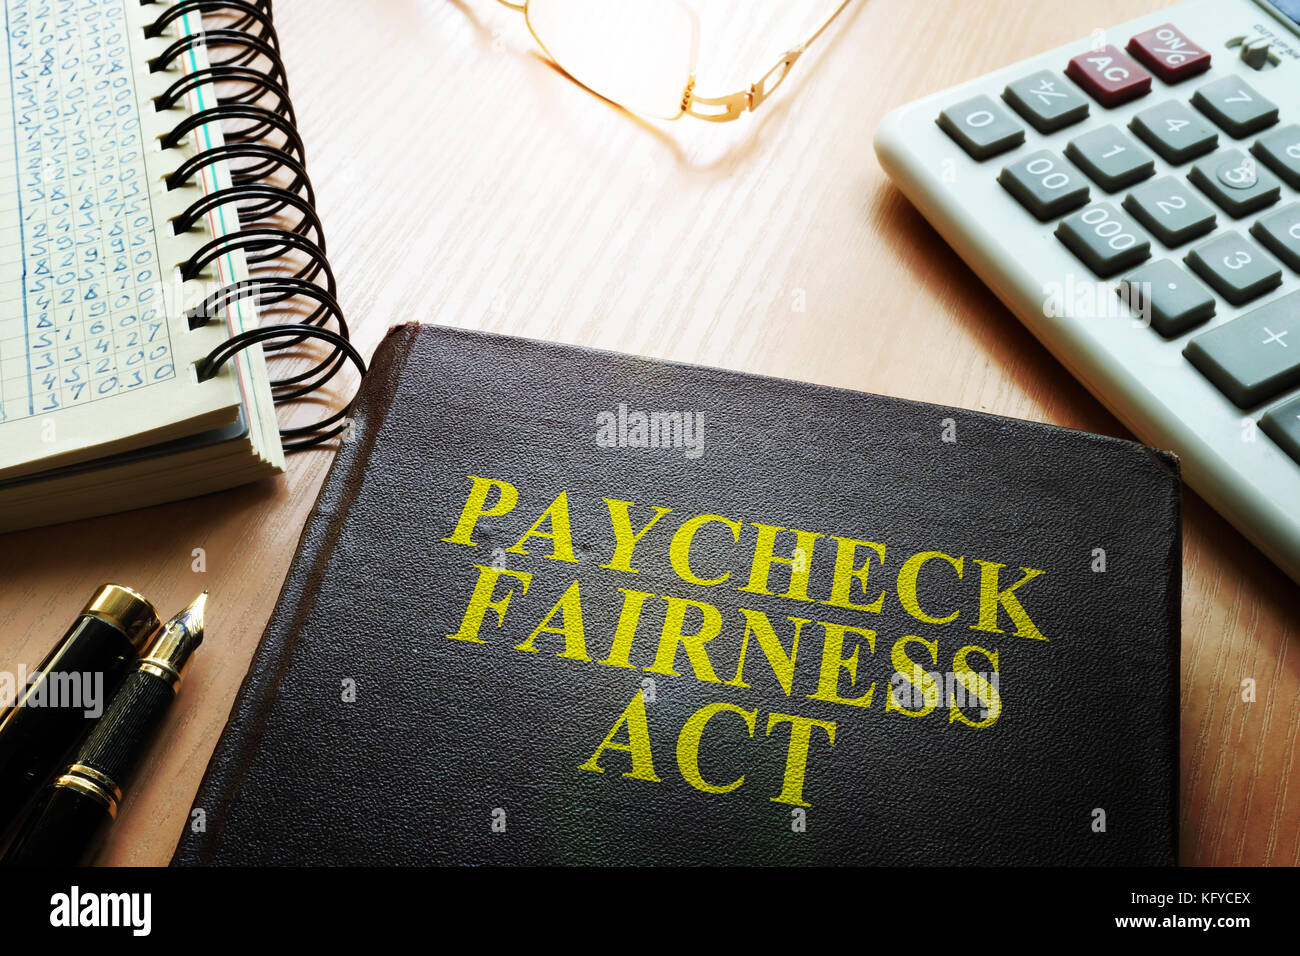 Book about Paycheck Fairness Act on a desk. Stock Photo